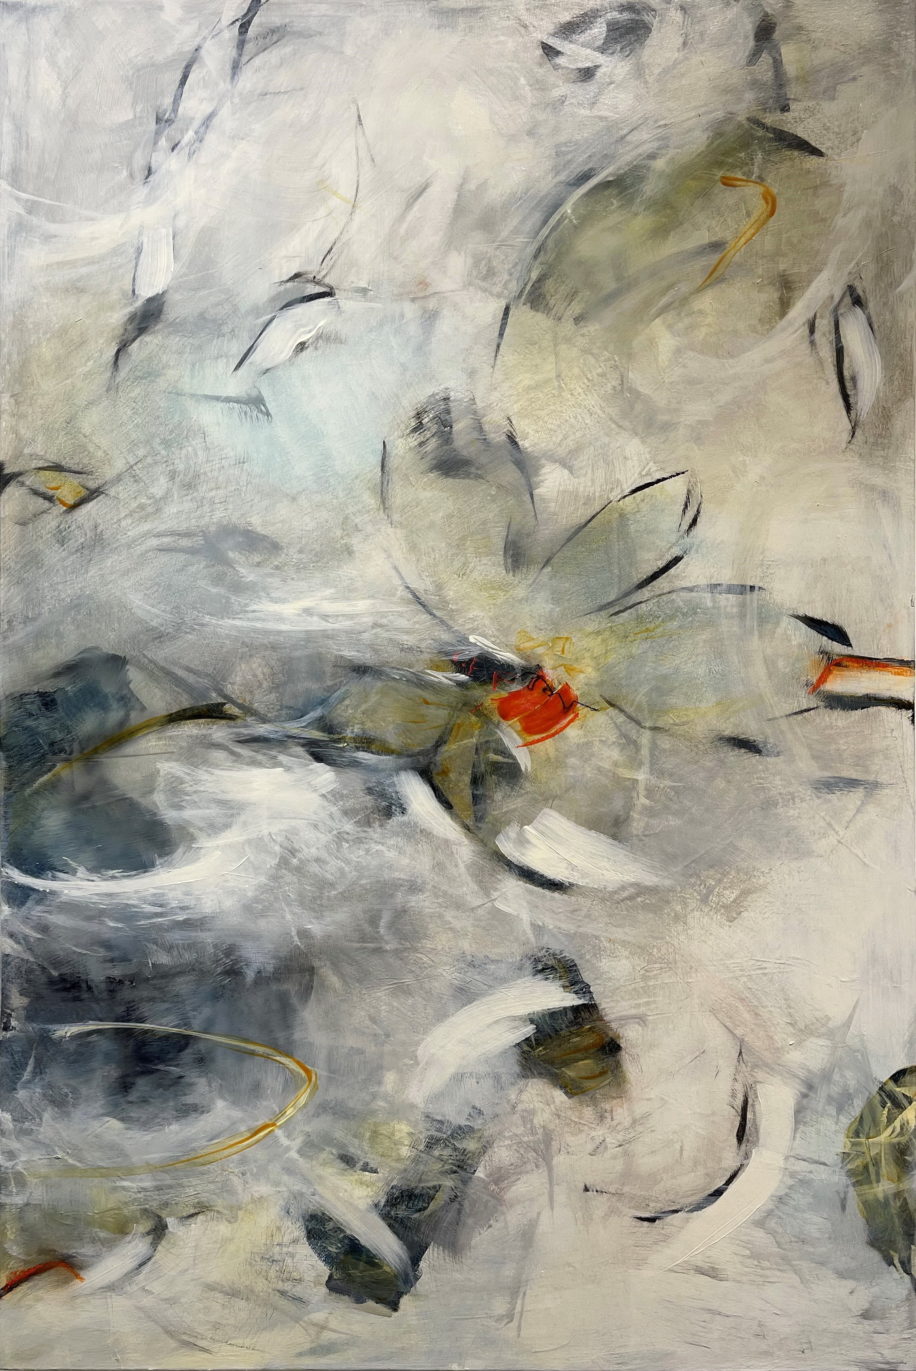 Wings by Marianne Meyer at The Avenue Gallery, a contemporary fine art gallery in Victoria, BC, Canada